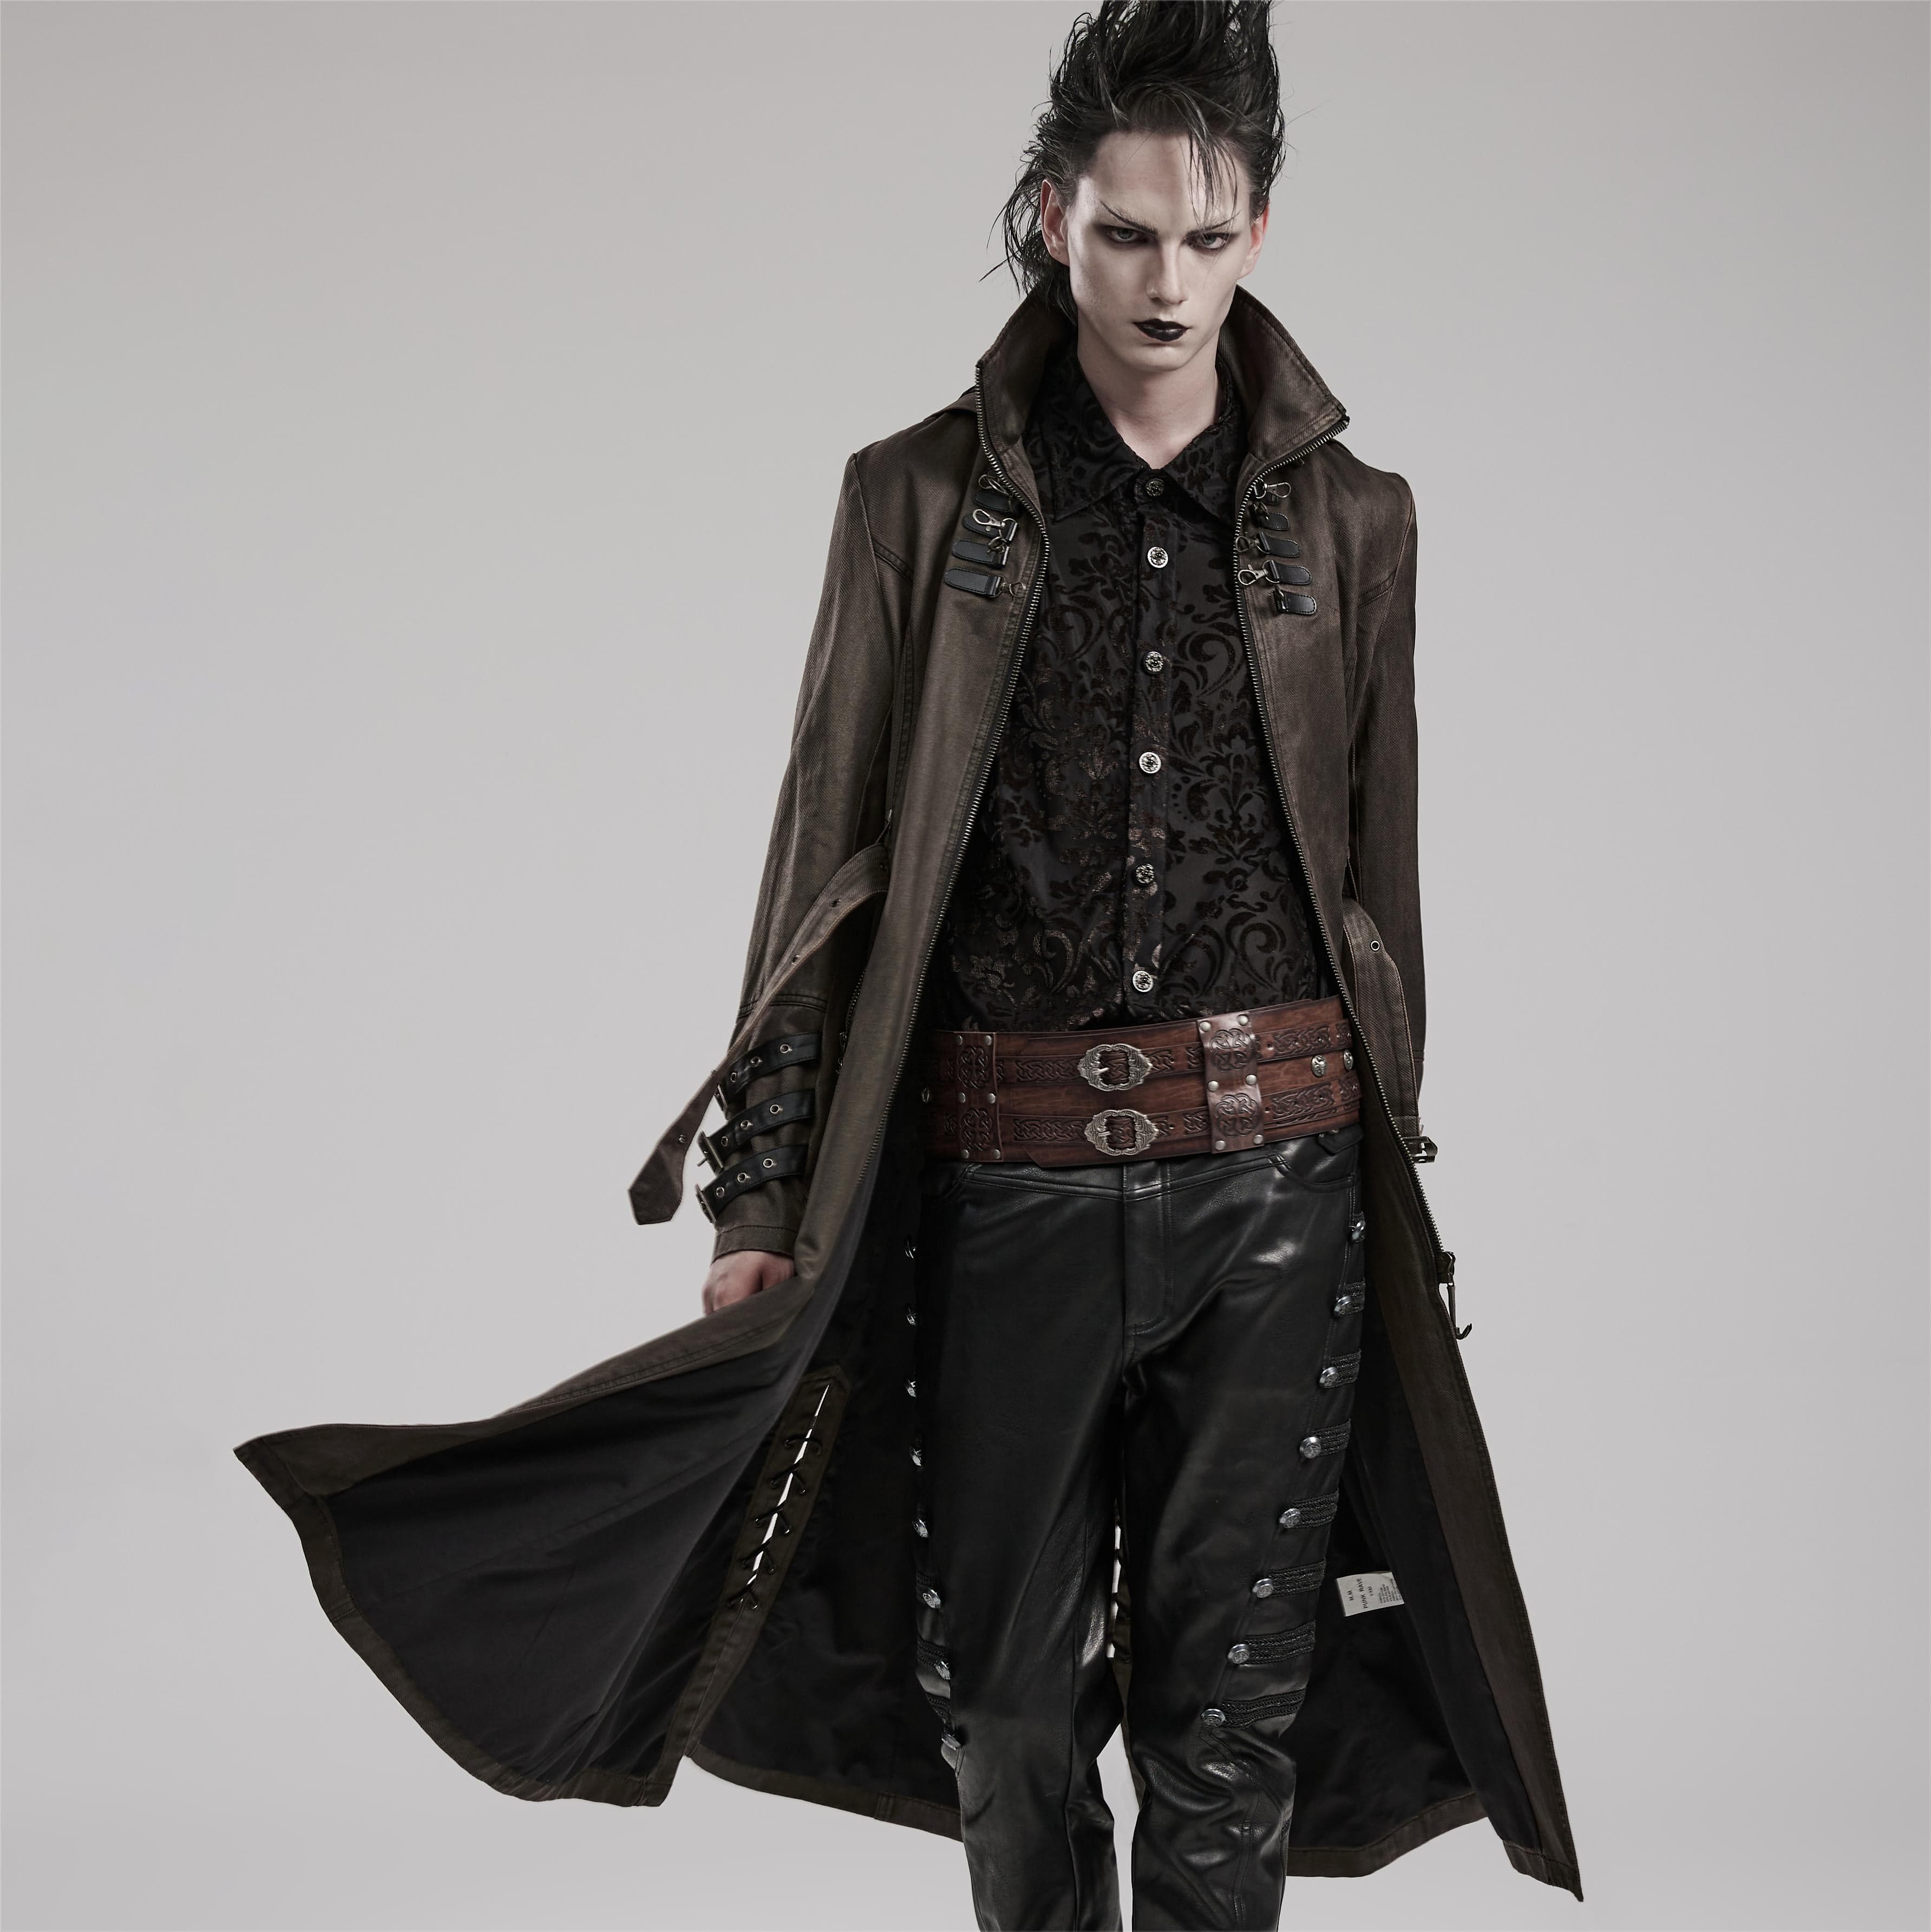 Men's Long Cloak Cape Coat Loose Hoodie Jackets PunK Trench Gothic Cosplay